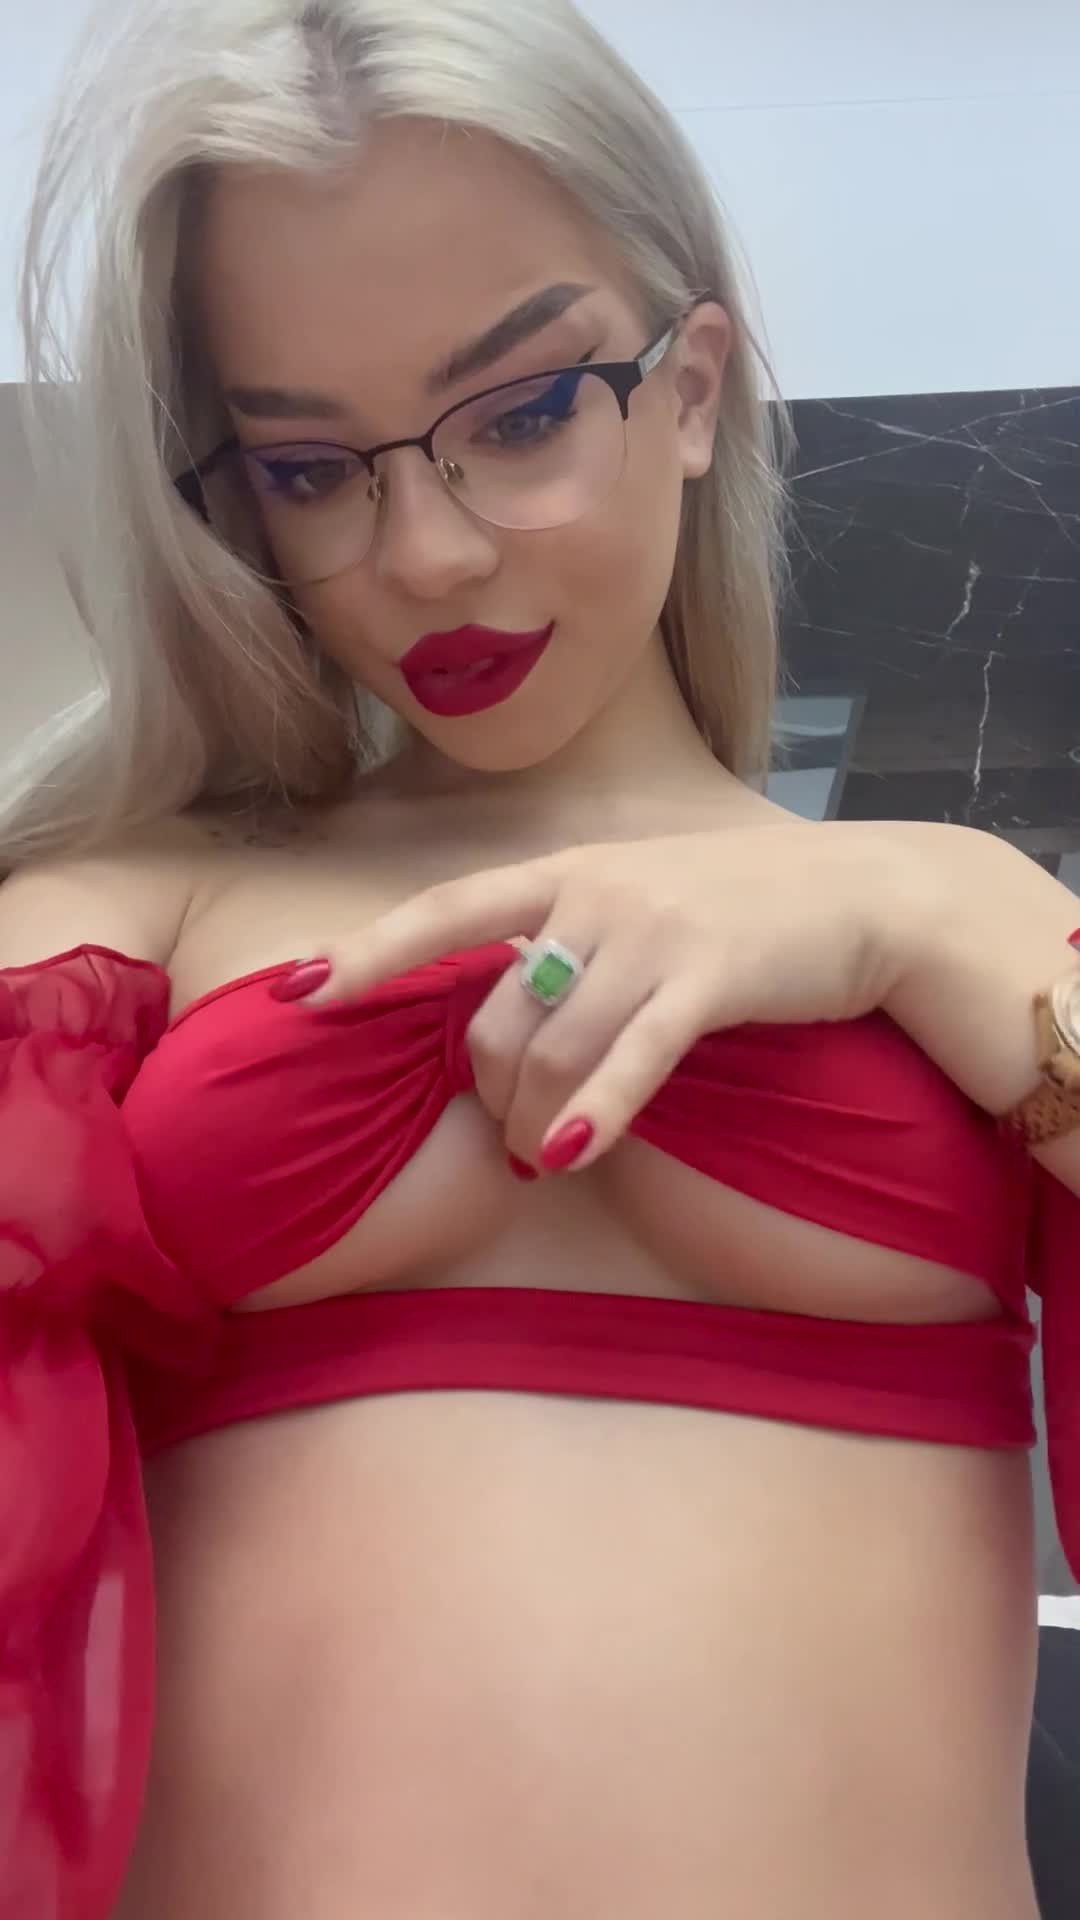 Video by EdenFay with the username @EdenFay, who is a star user,  February 6, 2024 at 7:39 AM. The post is about the topic Amateurs and the text says 'Online and ready:

https://www.webgirls.cam/en/chat/EdenFay

#horny #babe #curves #women #onlyfans #sexy #xxx #onlyfansgirl #naked #tits #boobs #teen #onlyfansnewbie #amateur #sexybabes #hot #lingerie #cute #beautiful #amazing #gorgeous #girlnextdoor..'